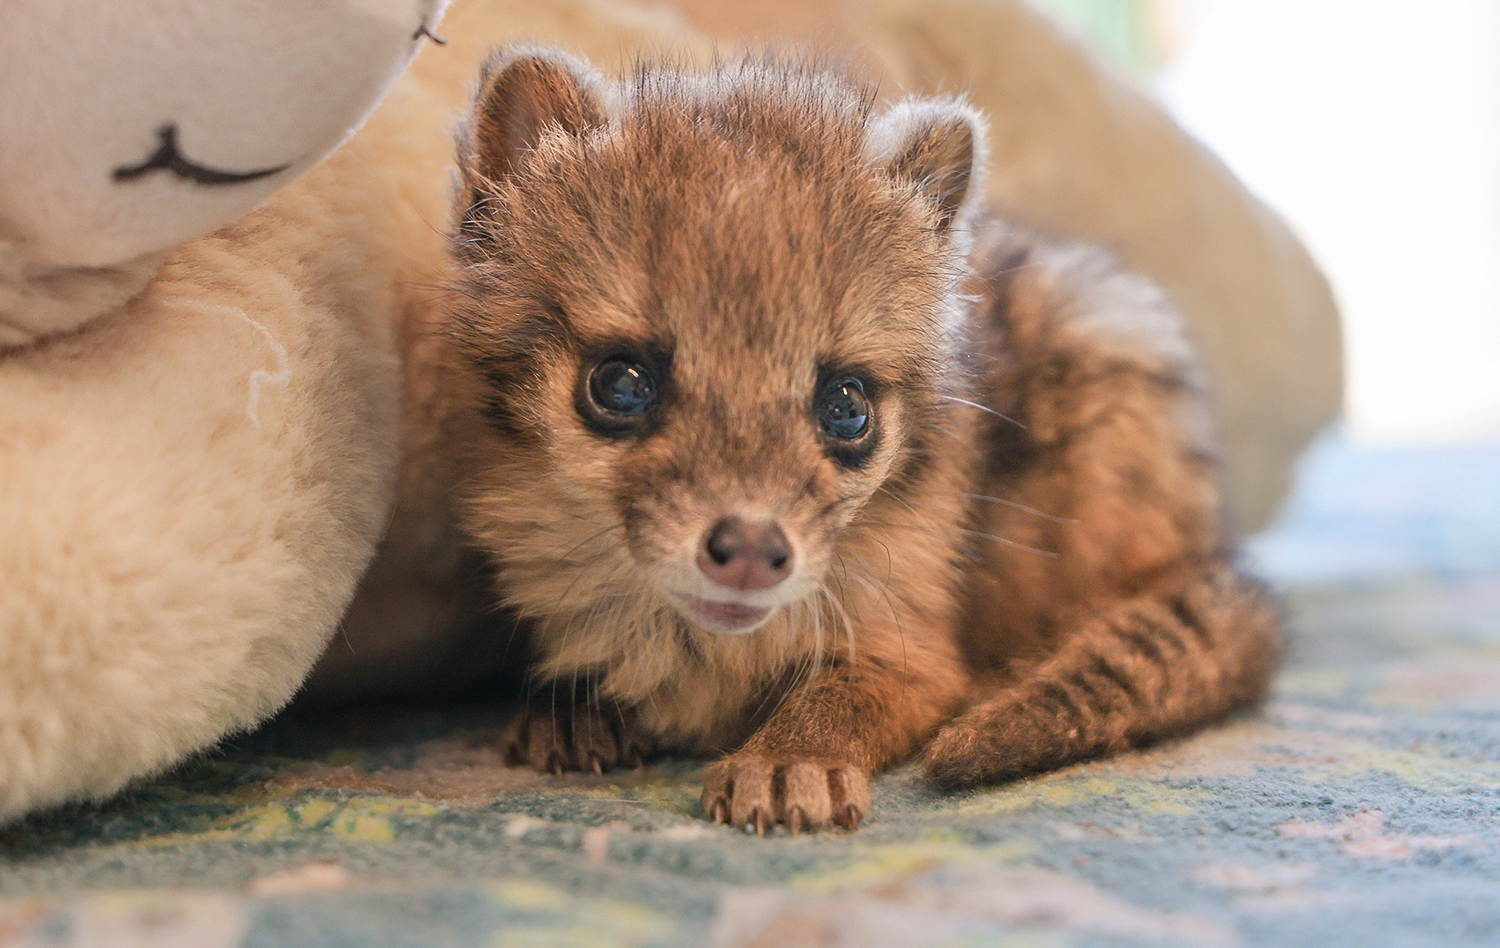 Nashville Zoo Welcomes a Rare Baby Spotted Fanaloka –– the First to be Born in America